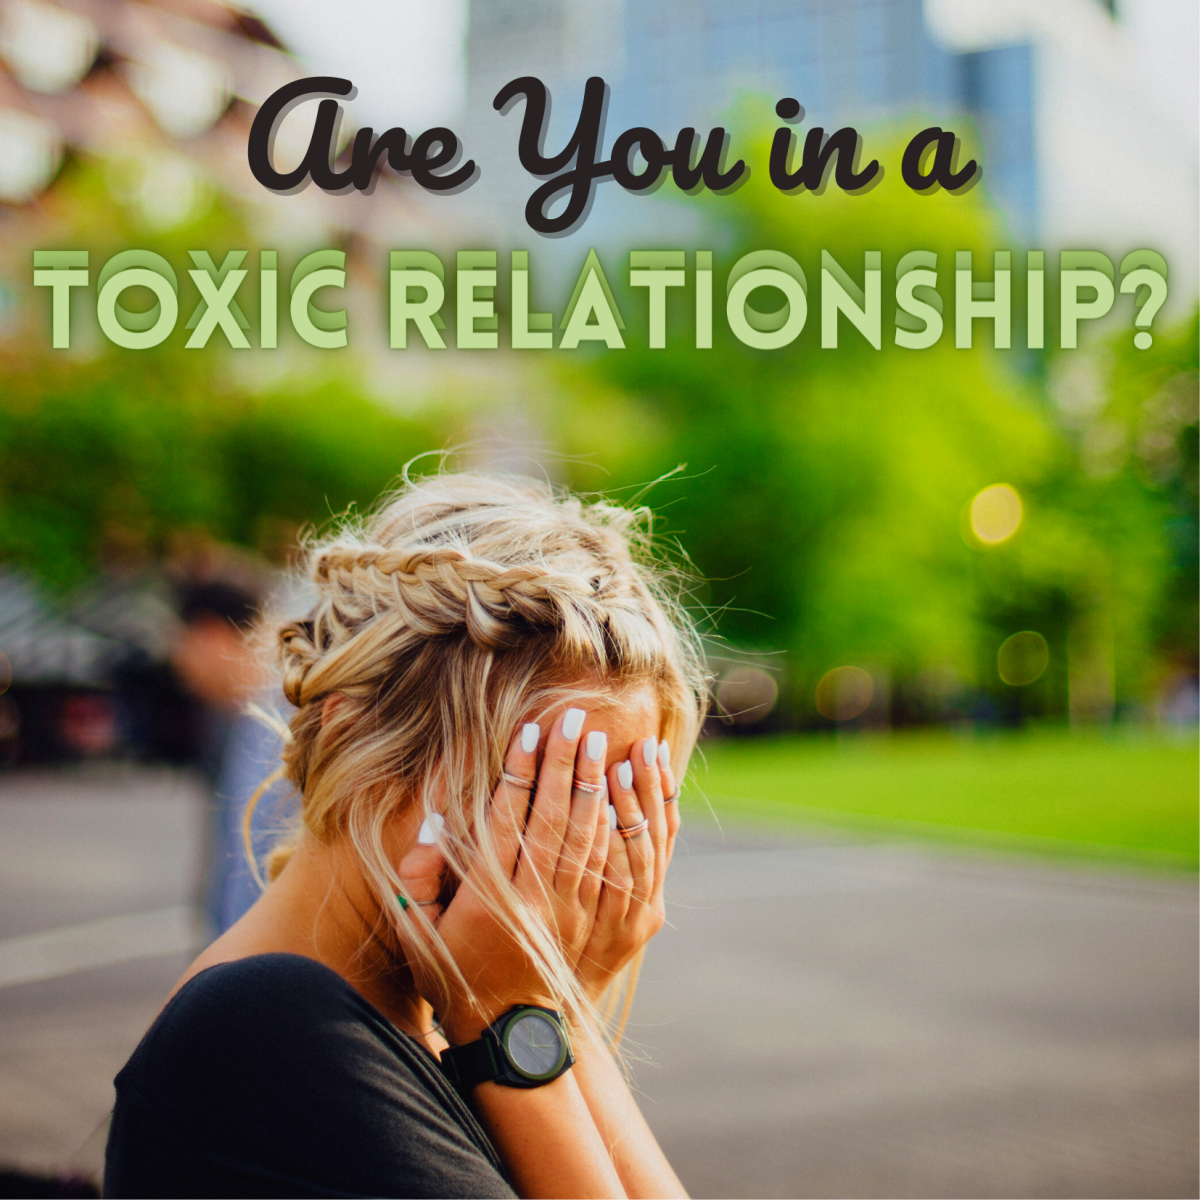 Here are 10 signs that you're in a toxic relationship.